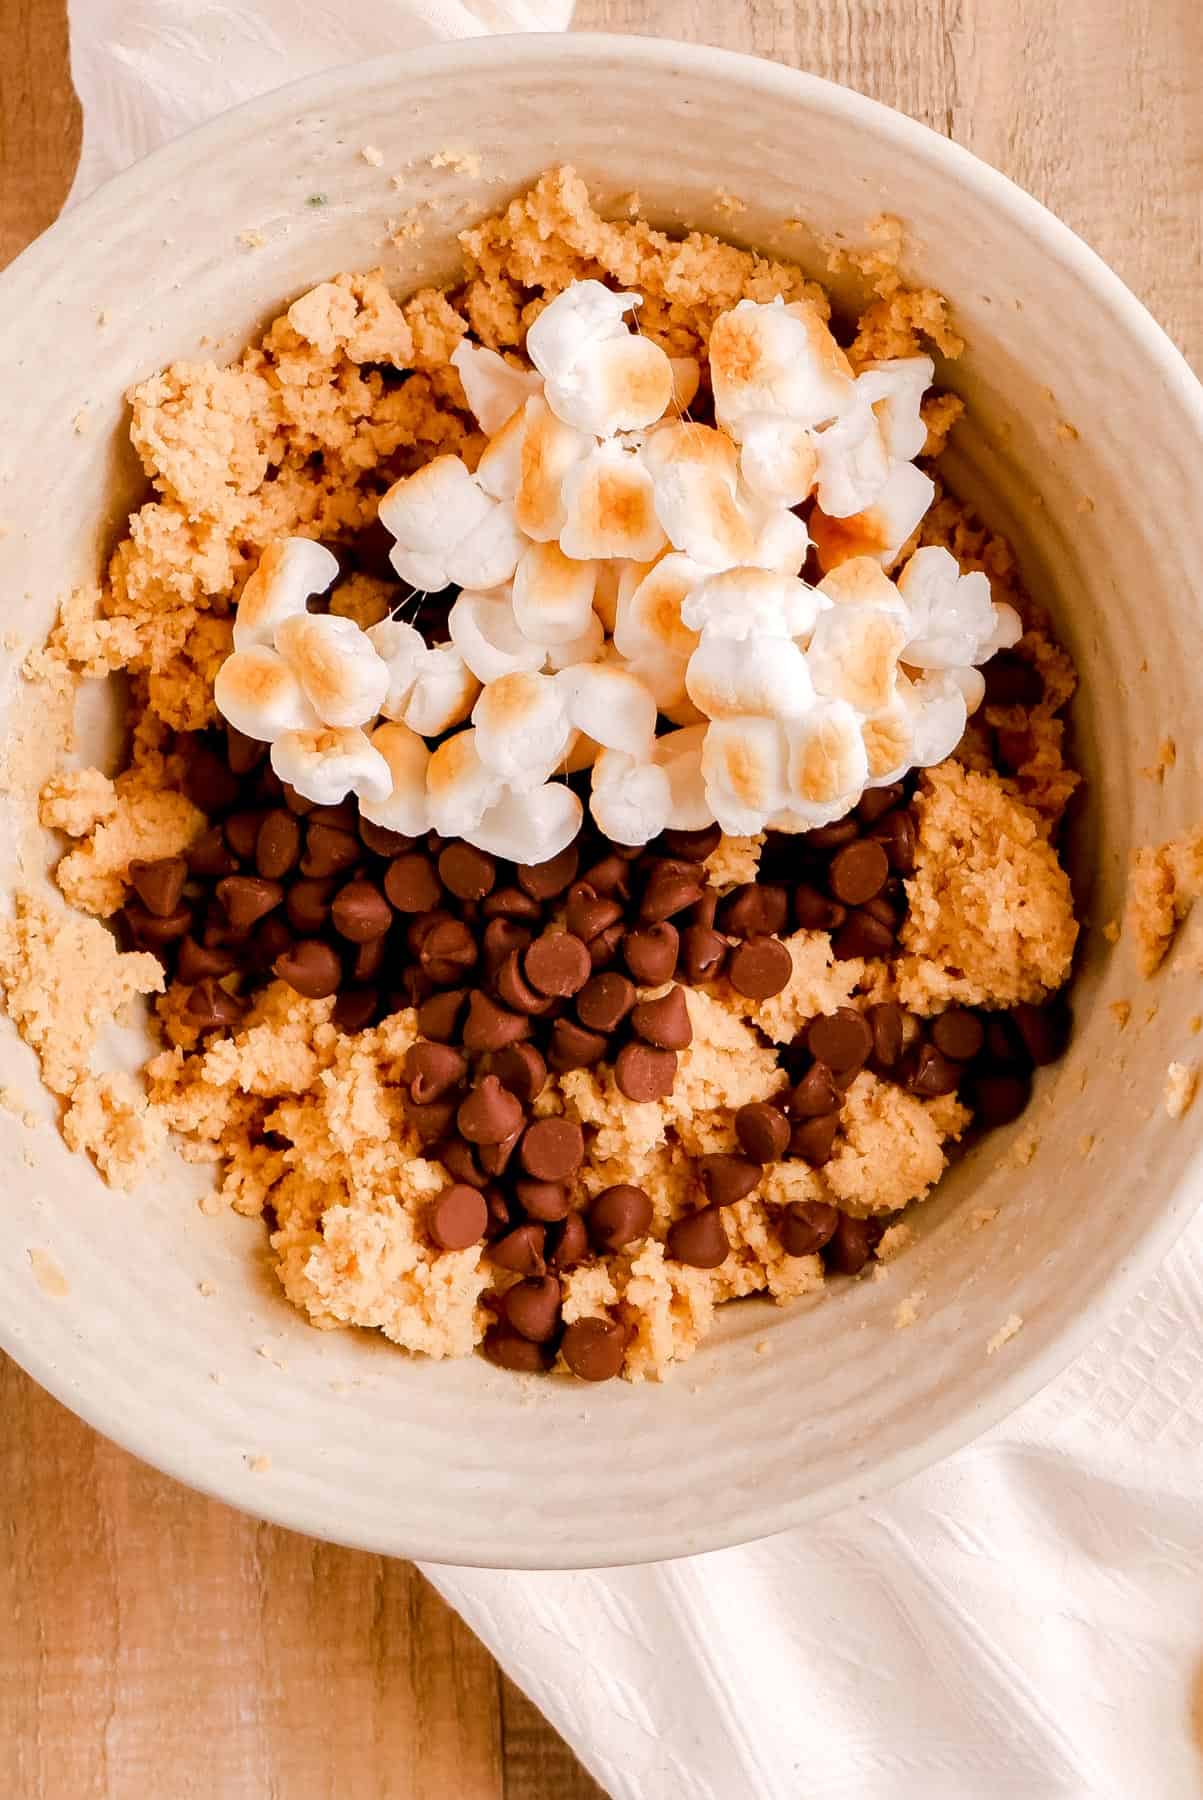 chewy smores cookies batter with chocolate chips and marshmalows on top.